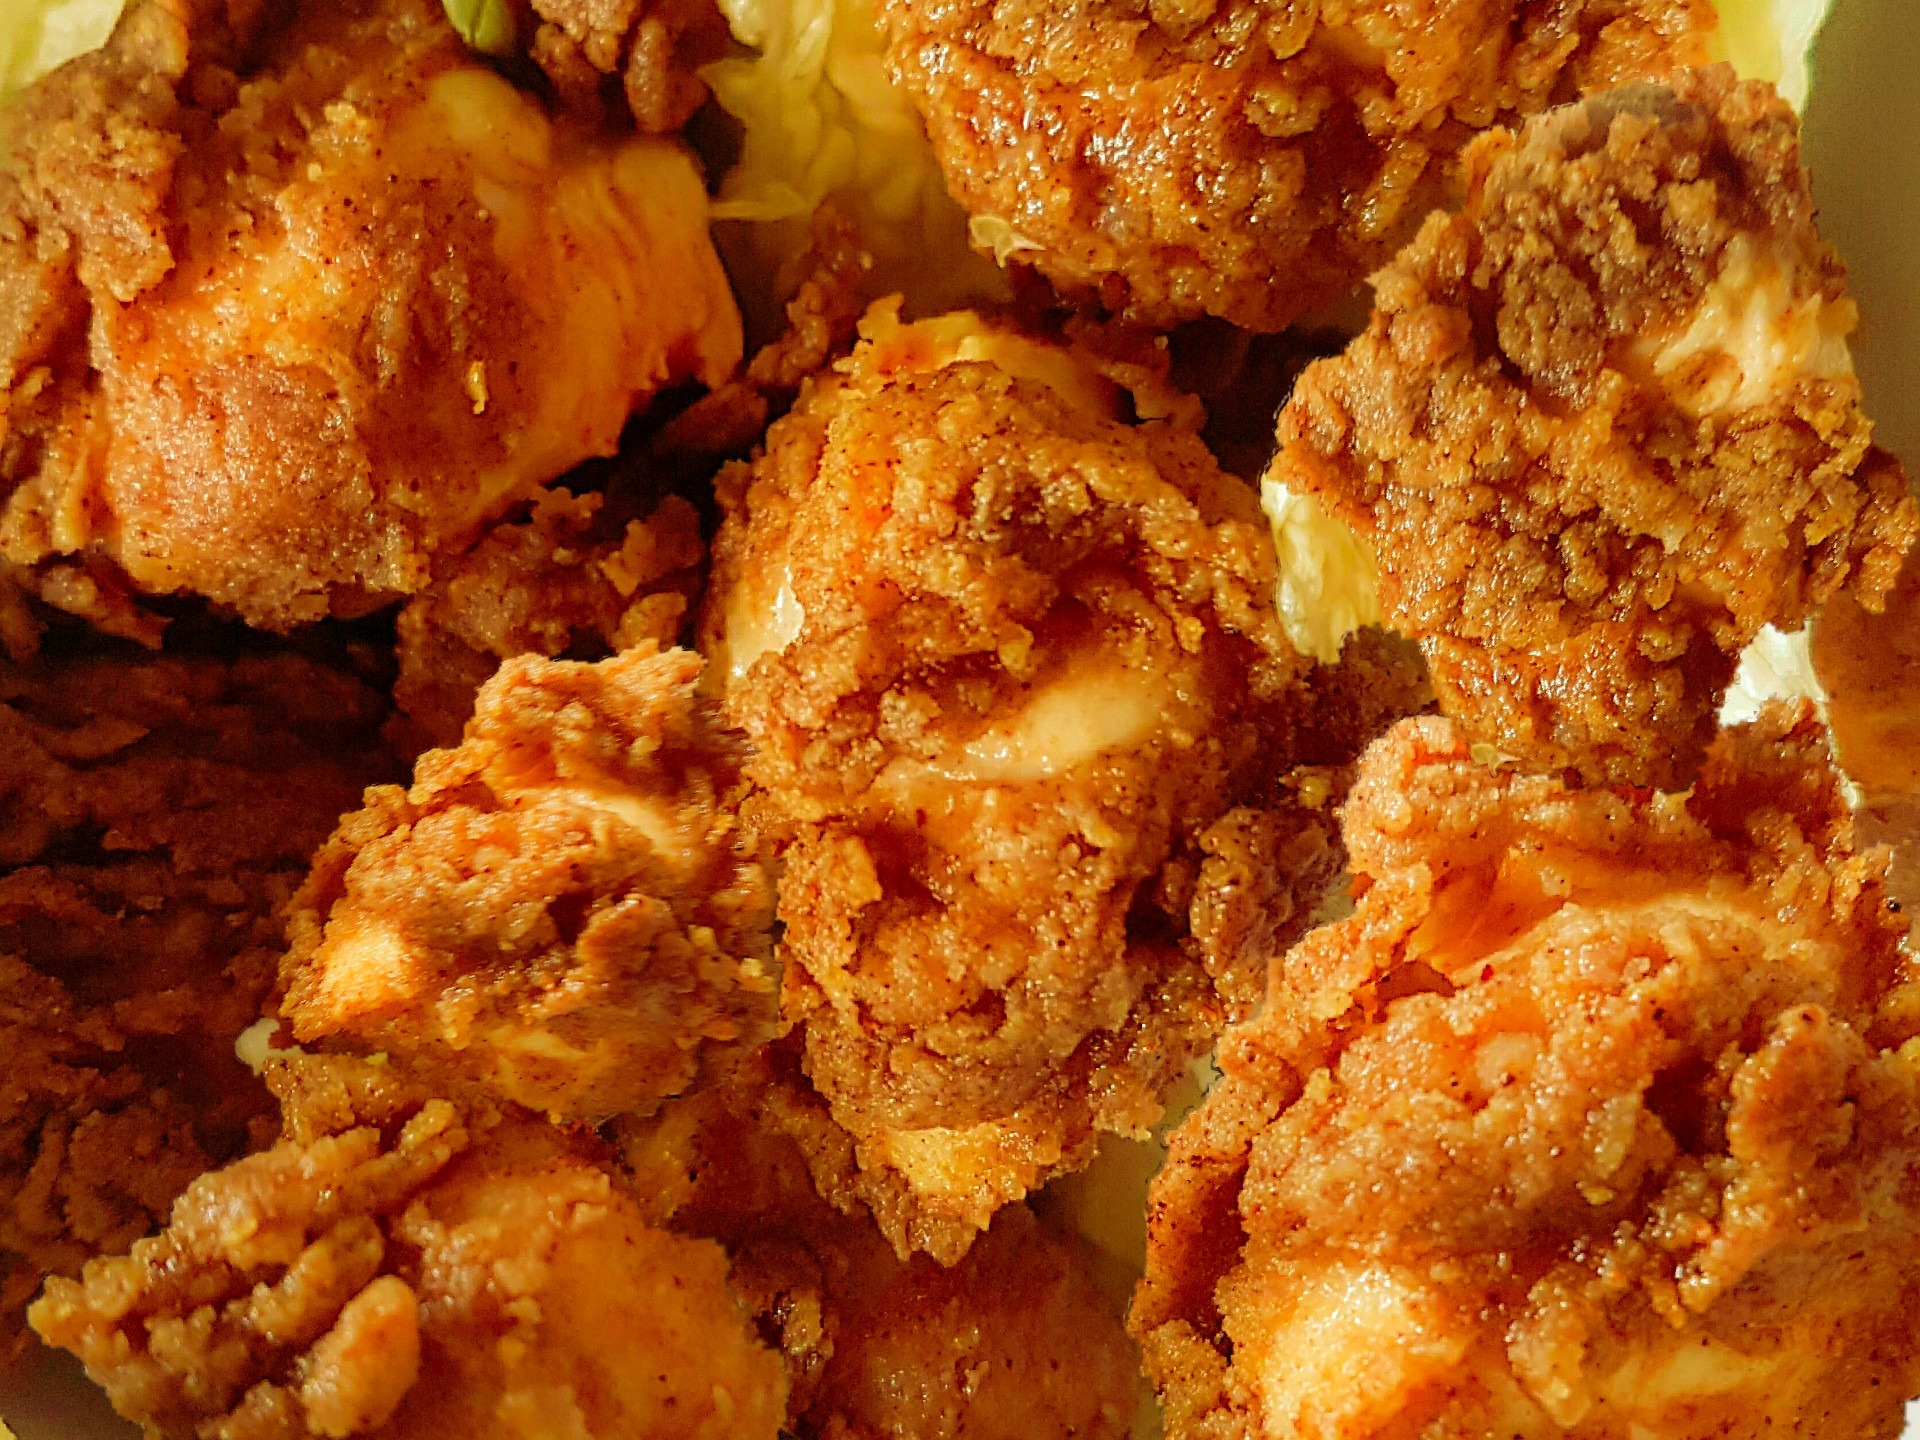 https://www.collectramatic.com.au/assets/images/chookies-spice-blend-southern-fried-chicken.jpeg